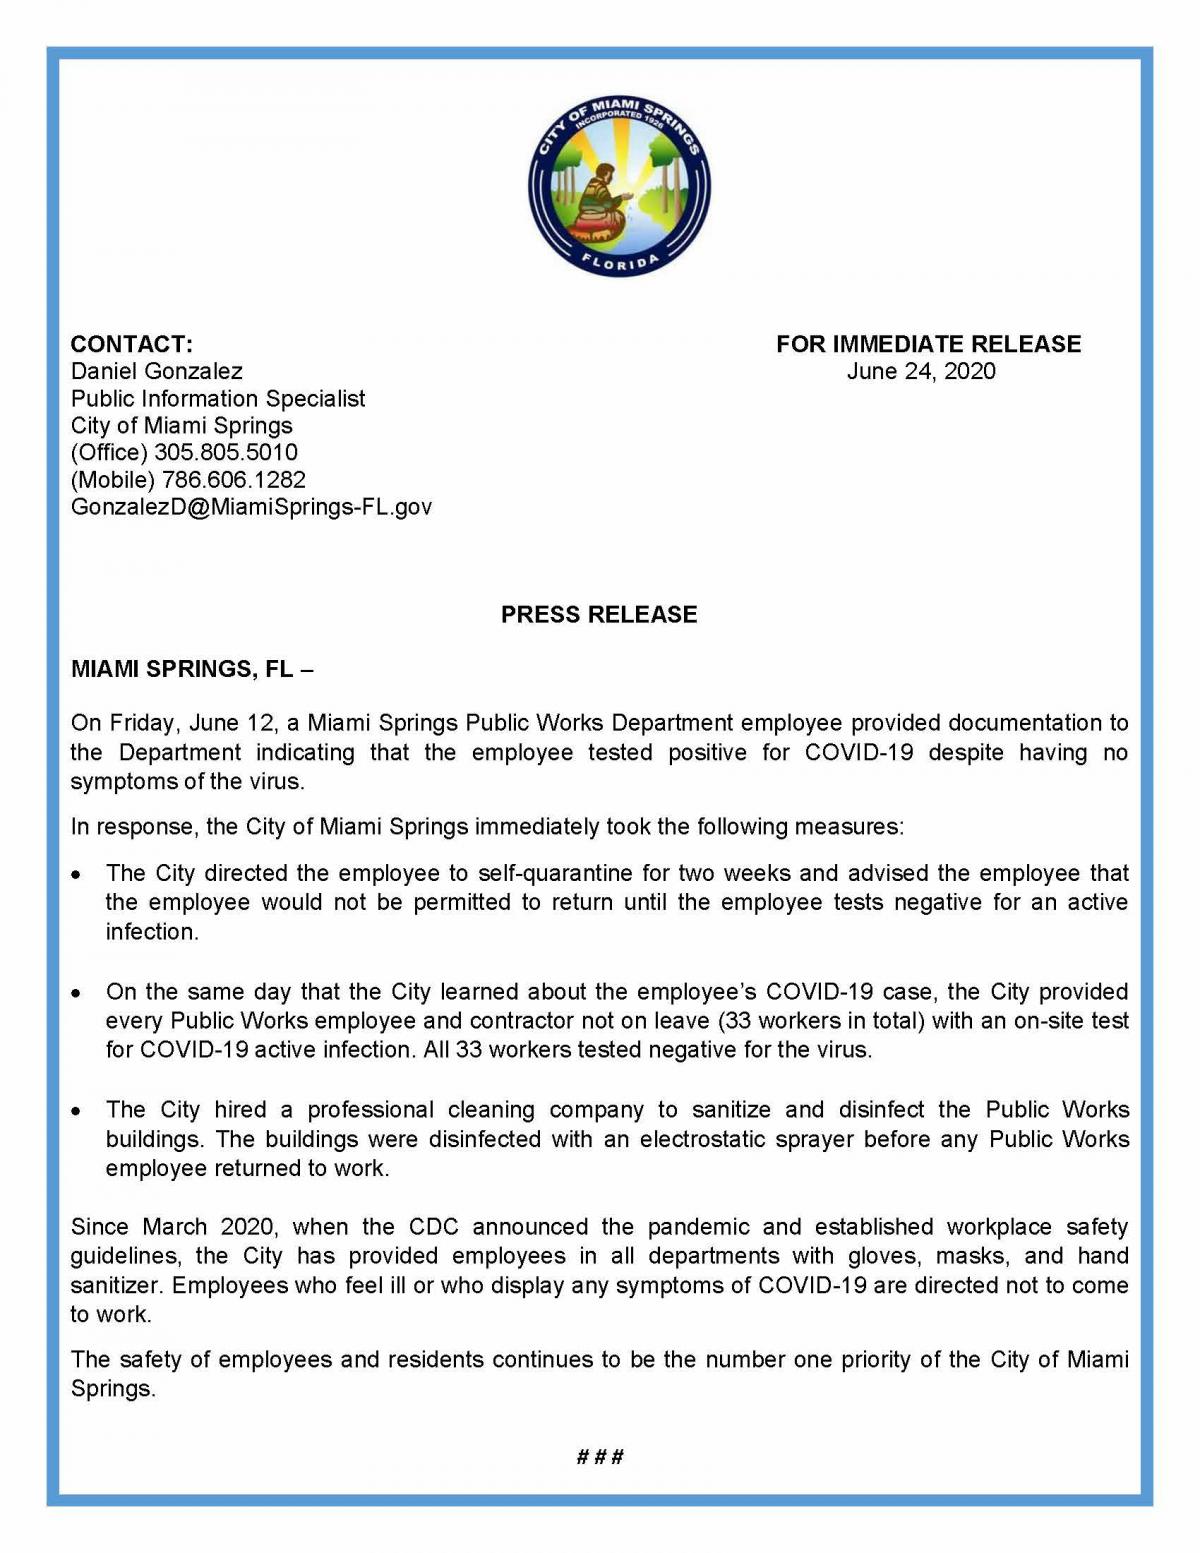 Press Release on Public Works Employee Testing Positive for COVID-19 & Measures Taken